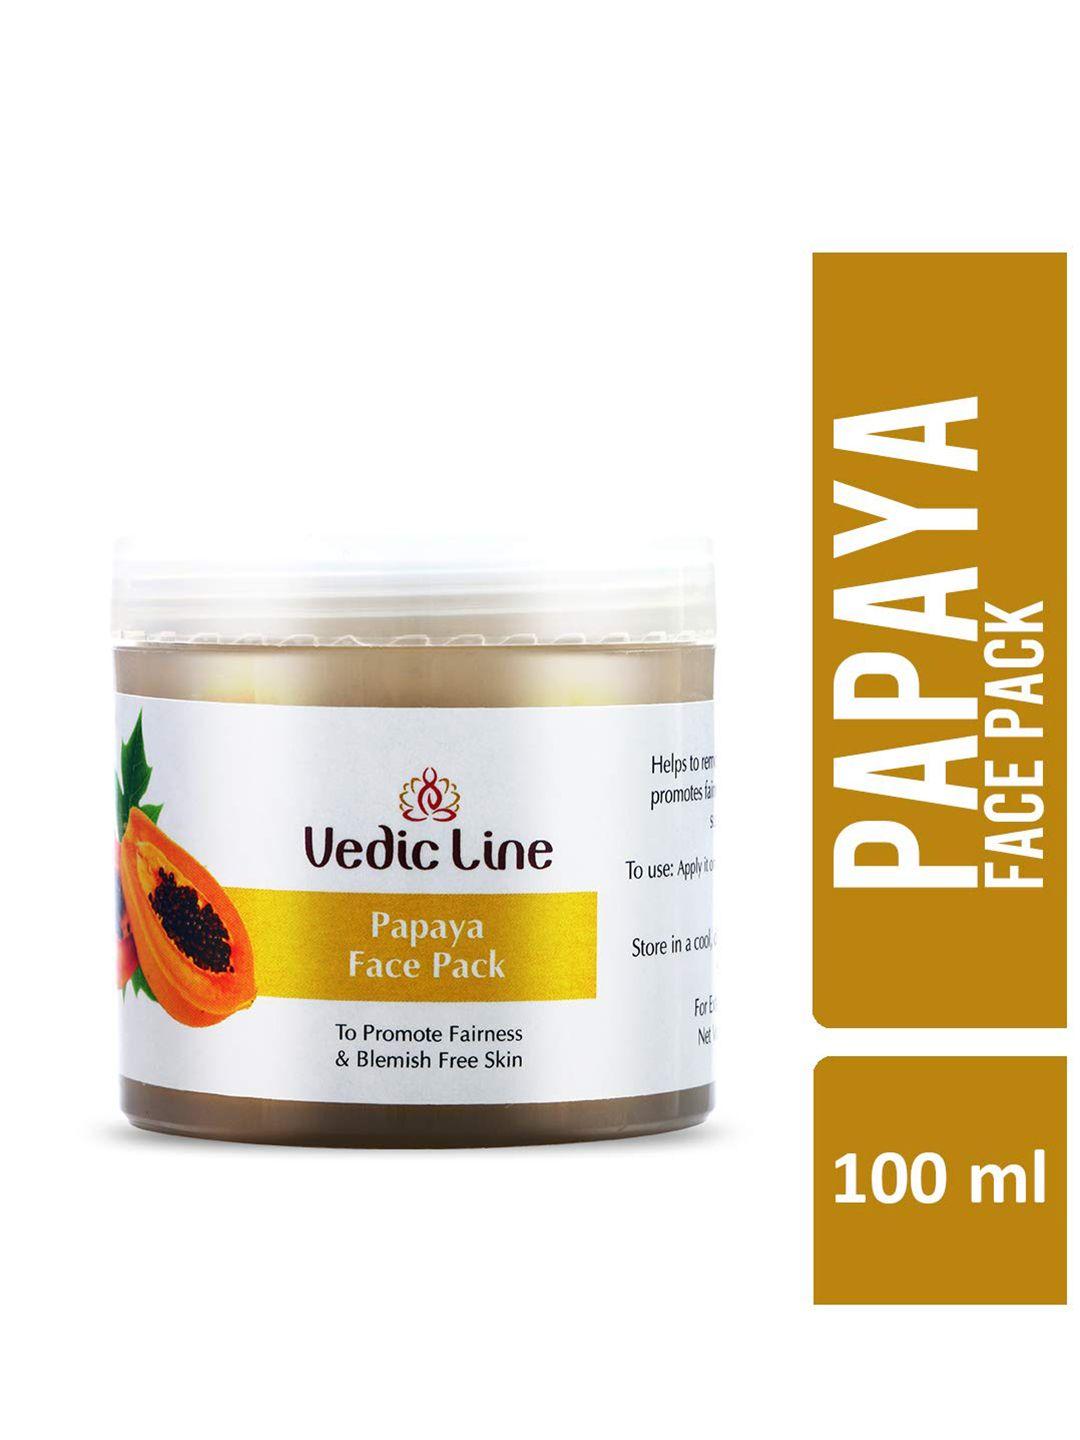 vedicline papaya face pack with apricot oil - 100ml